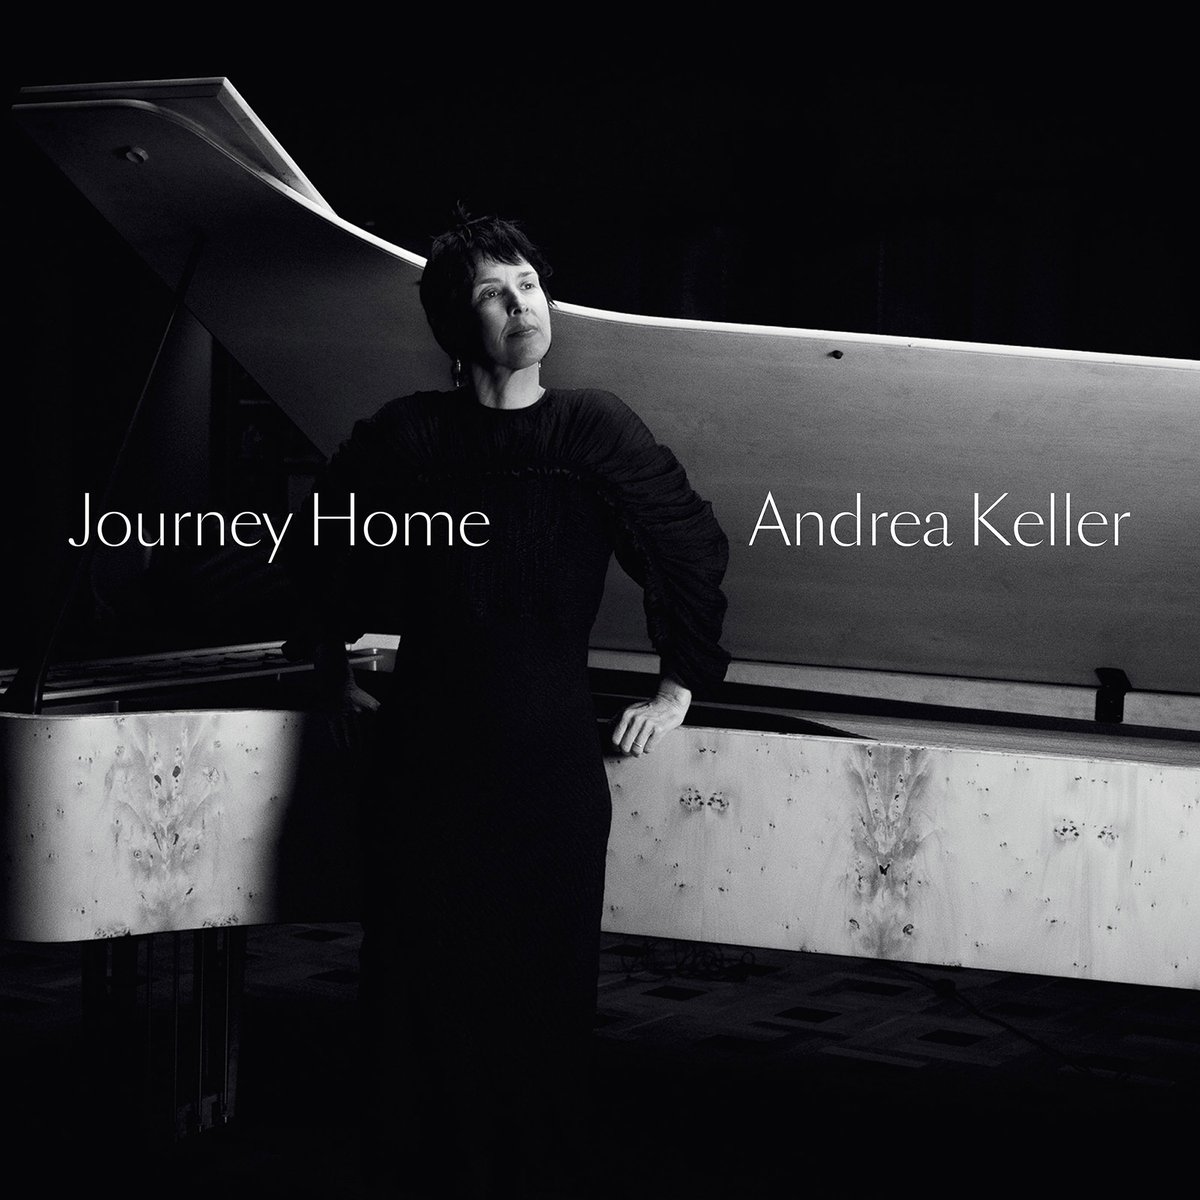 Looking for a great night out? @NEALgeelong has you covered! Grab some friends and join us on Thursday 14 July for Journey Home with renowned composer and pianist Andrea Keller @souptinbaby Tickets: platformarts.org.au/events/neal-jo… @PlatformGeelong #livemusic #geelong